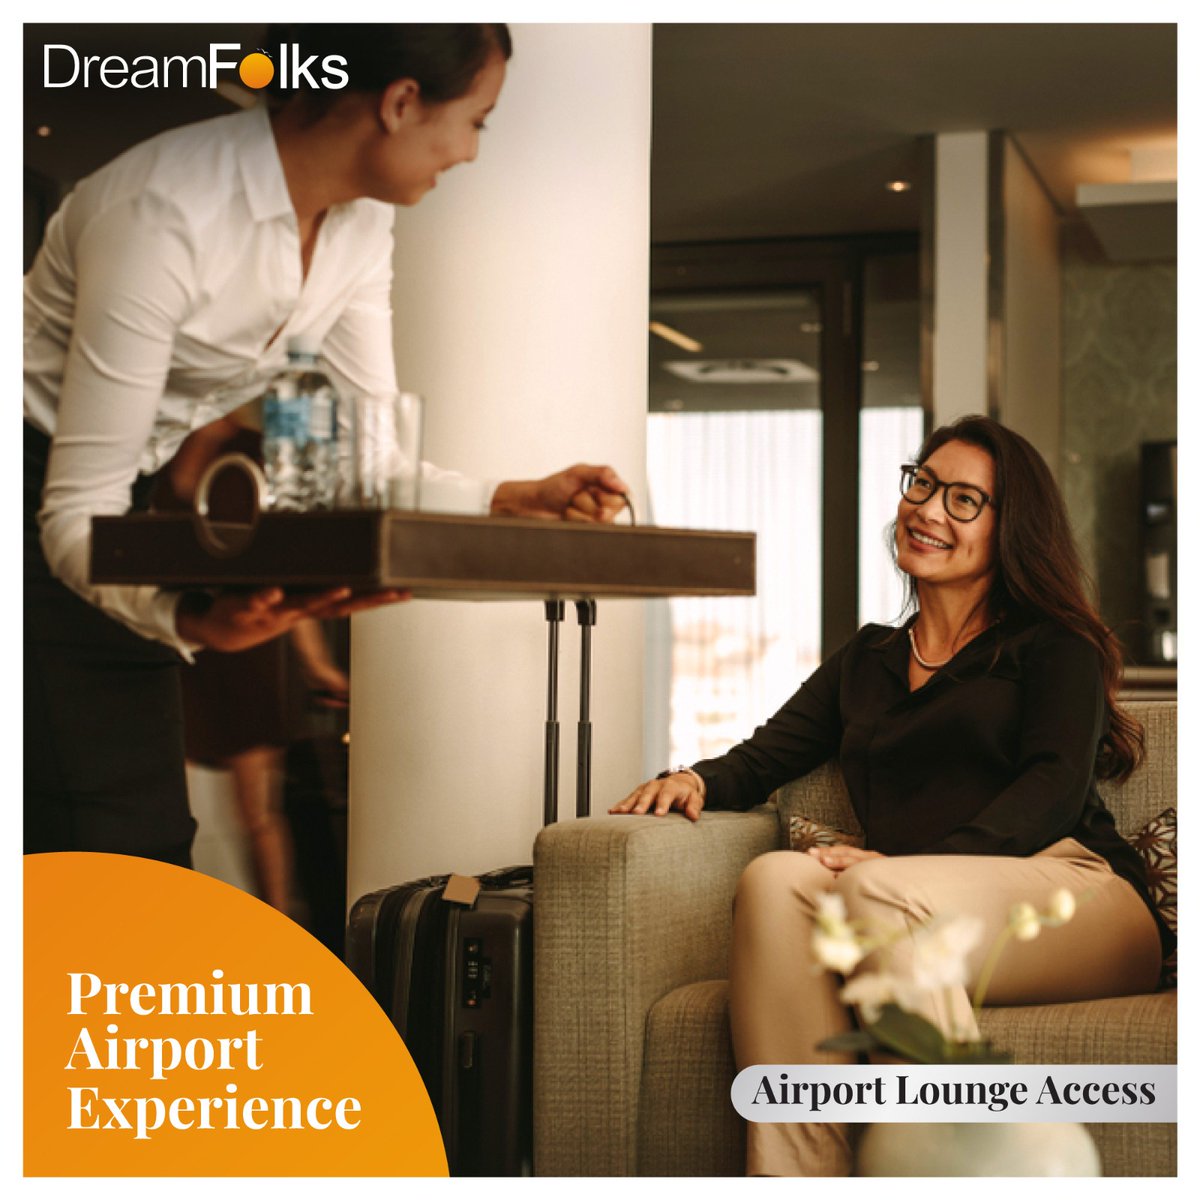 Enhance #customerretention, employee loyalty and reward channel partners with #customsolutions from #DreamFolks!
From #AirportTransfers to #LoungeAccess, and much more, we seamlessly enhance their journey, turning moments into memories.

Visit the website to learn more.